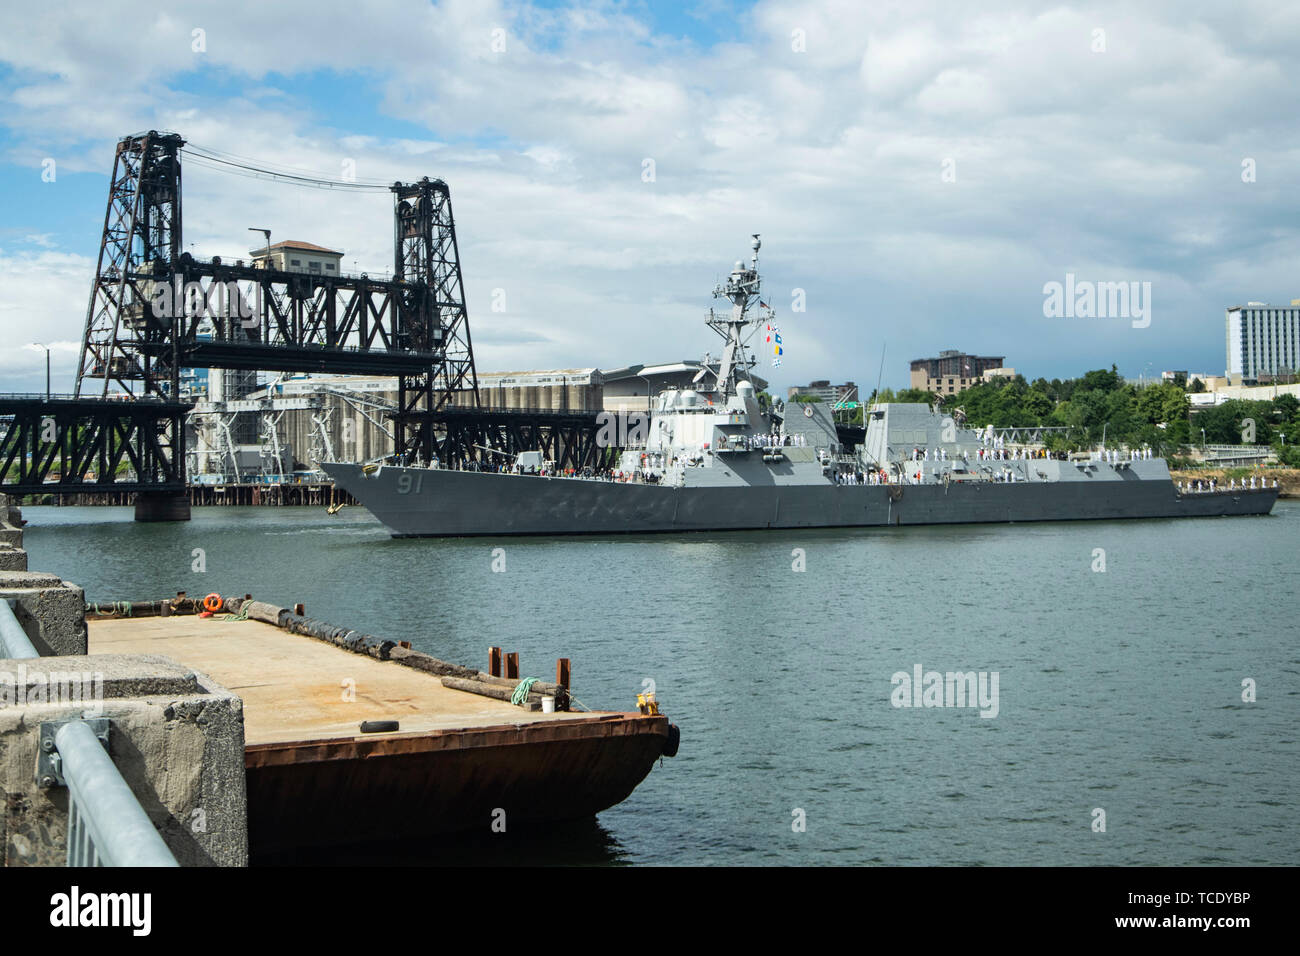 190606-N-DX615-1031 PORTLAND, Ore. (June 6, 2019) The Arleigh Burke-class guided-missile destroyer USS Pinckney (DDG 91) prepares to moor in Portland for Portland Fleet Week. The annual event is a time-honored celebration of the sea services and provides an opportunity for the citizens of Oregon to meet Sailors, Marines and Coast Guardsmen, as well as witness firsthand the latest capabilities of today’s maritime services. (U.S. Navy photo by Chief Mass Communication Specialist Alan Gragg) Stock Photo